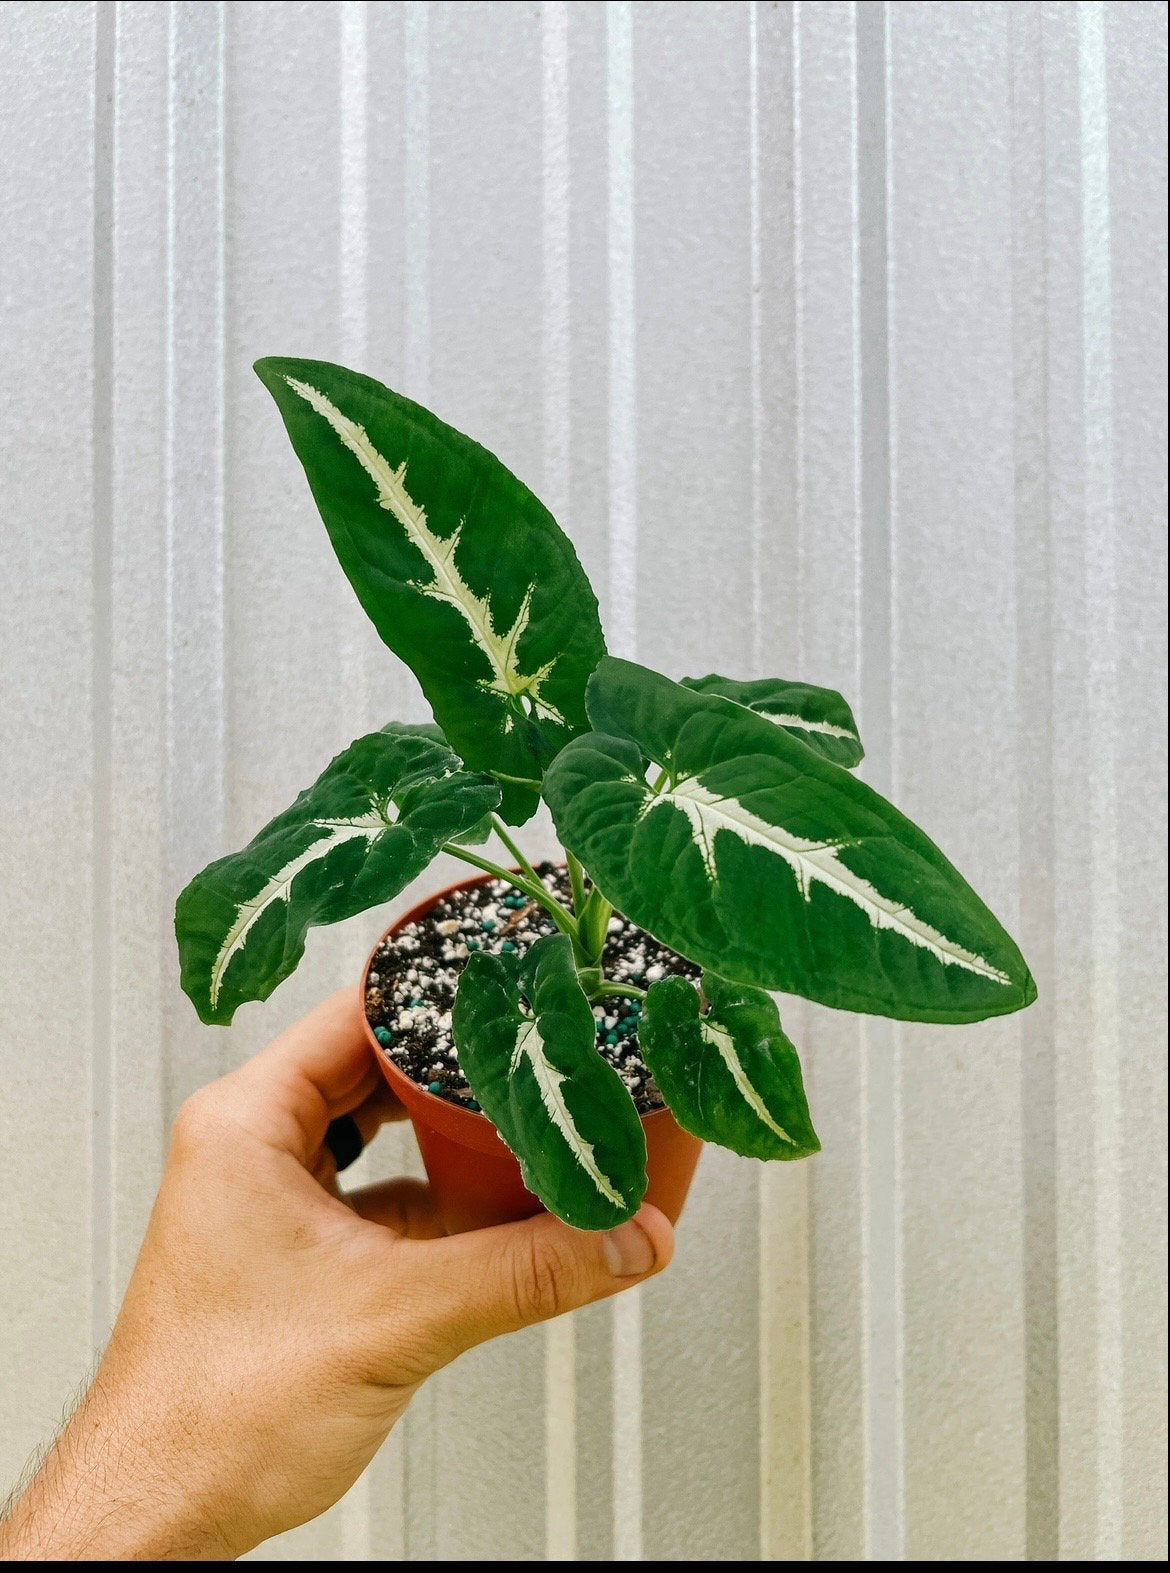 Syngonium wendlandii black velvet starter plant **(ALL plants require you to purchase ANY 2 plants!)**